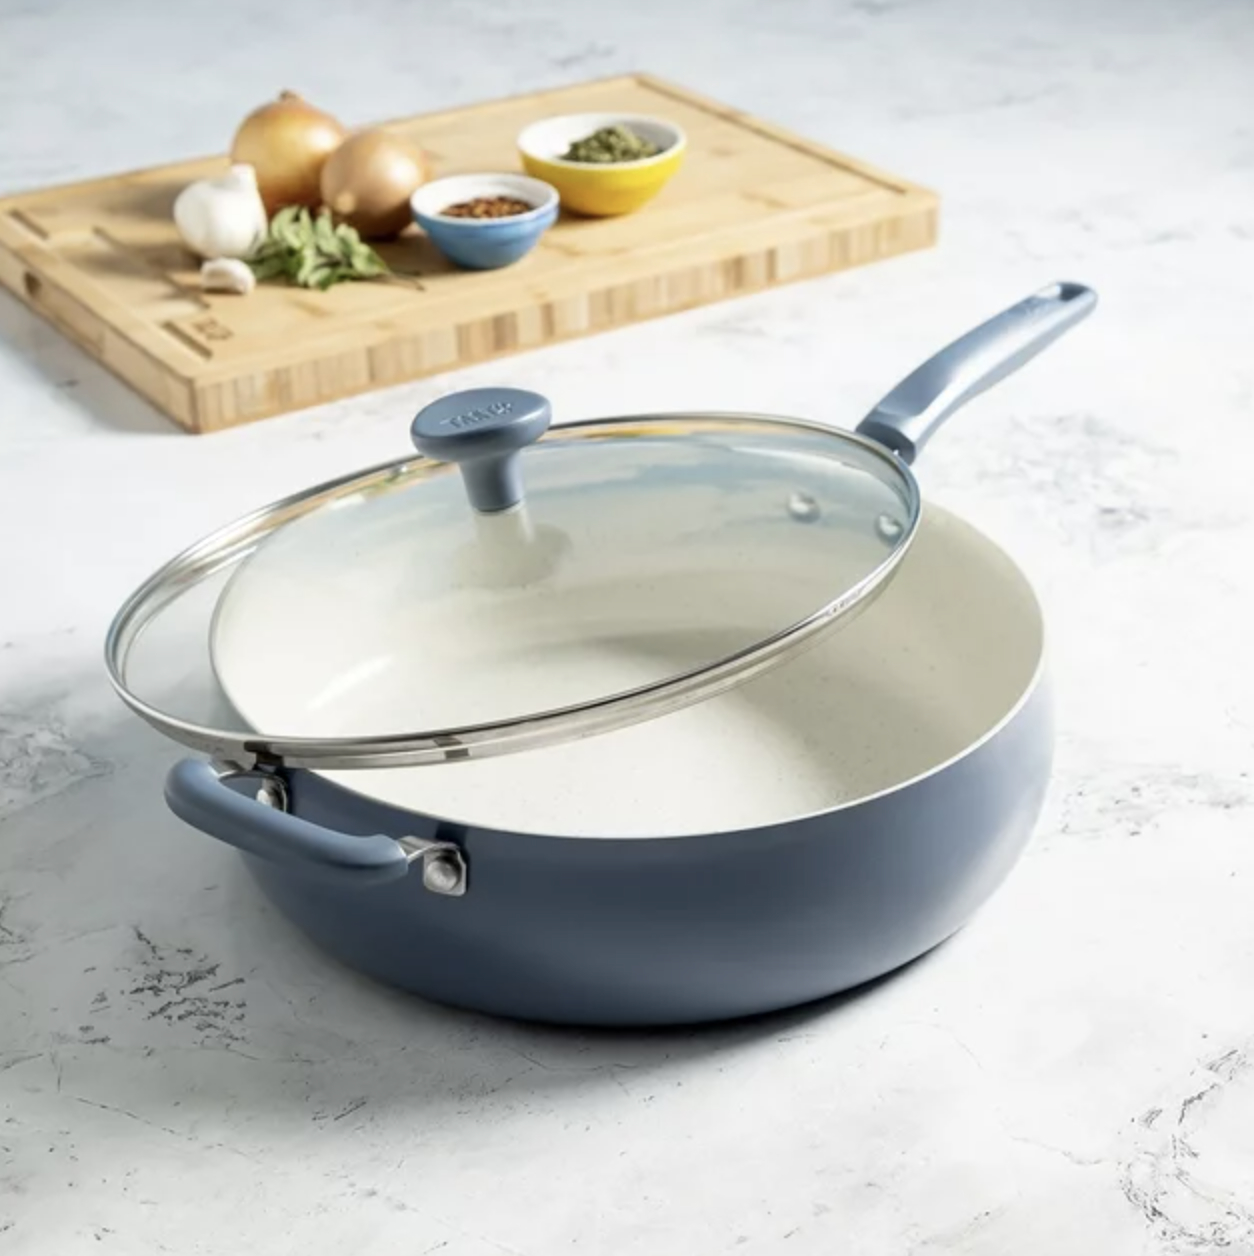 The grey blue pan with lid on countertop